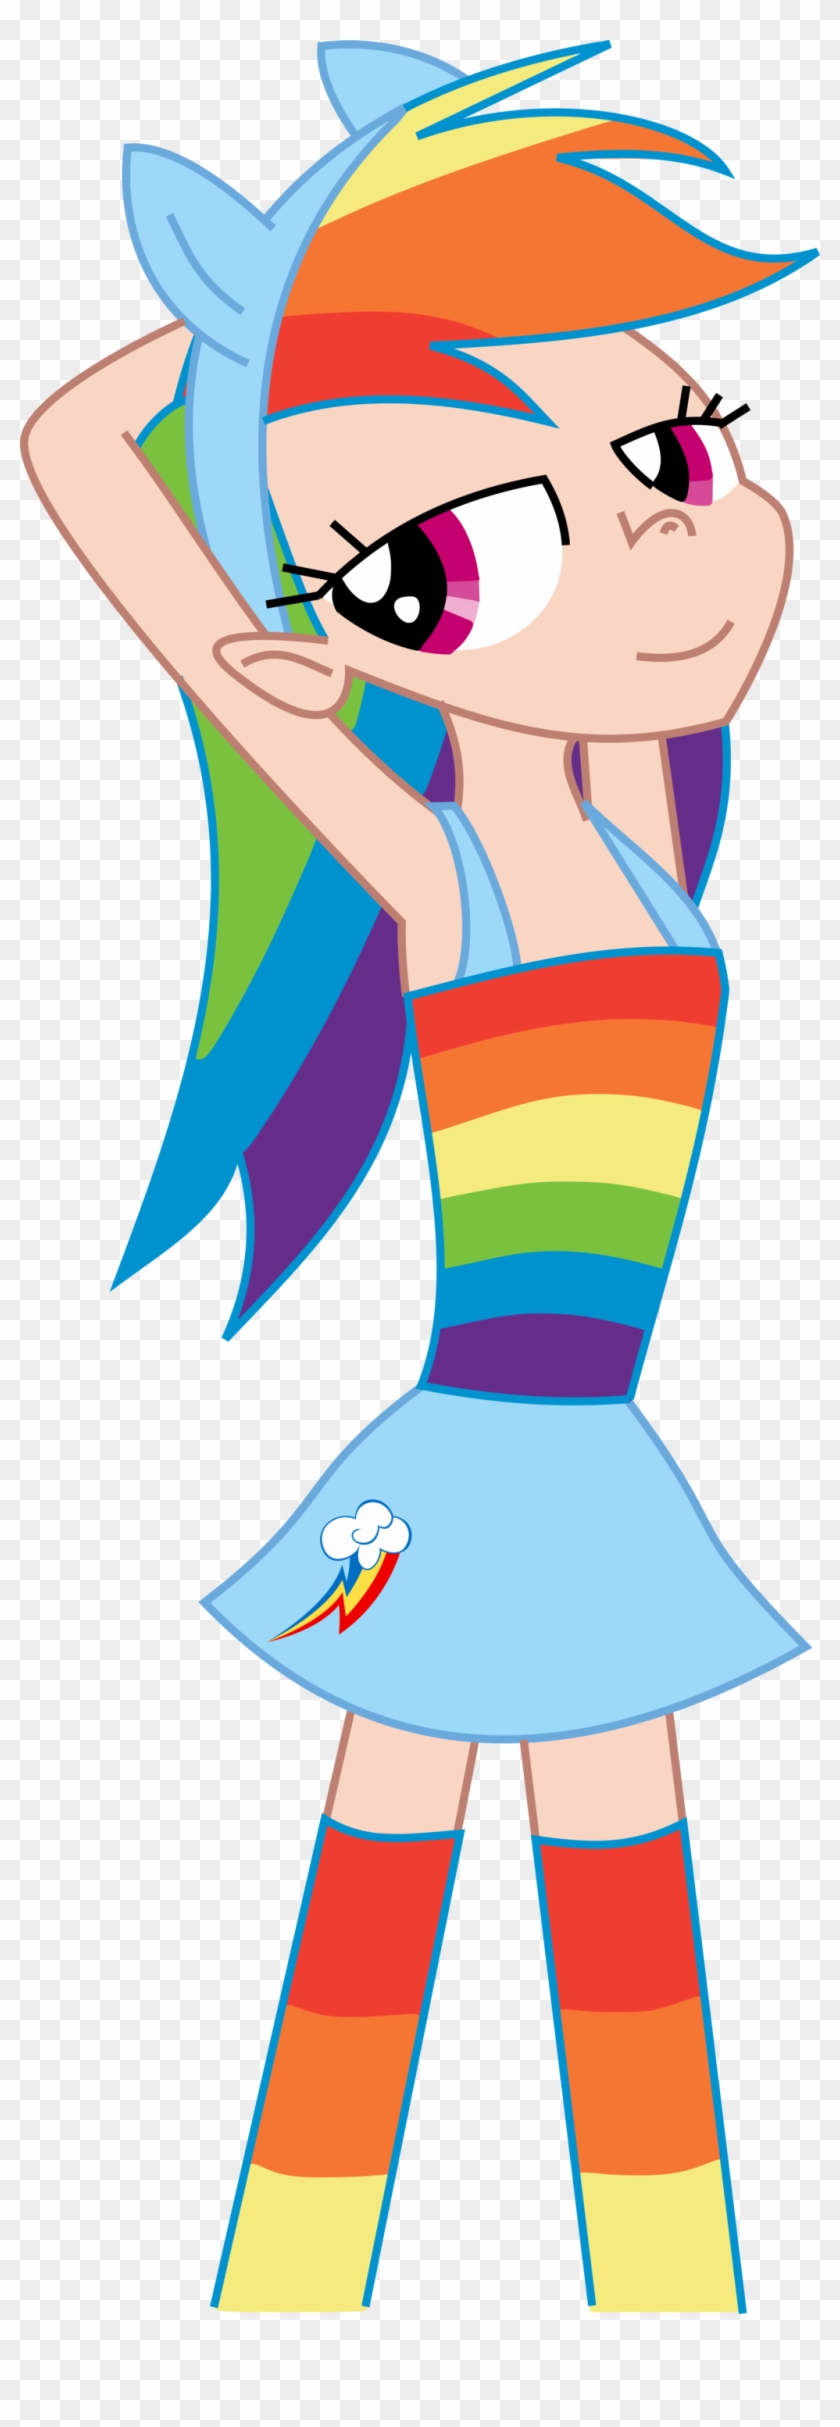 Star Butterfly And Rainbow Dash Comparison - Star Butterfly Rainbow Dress #1207675